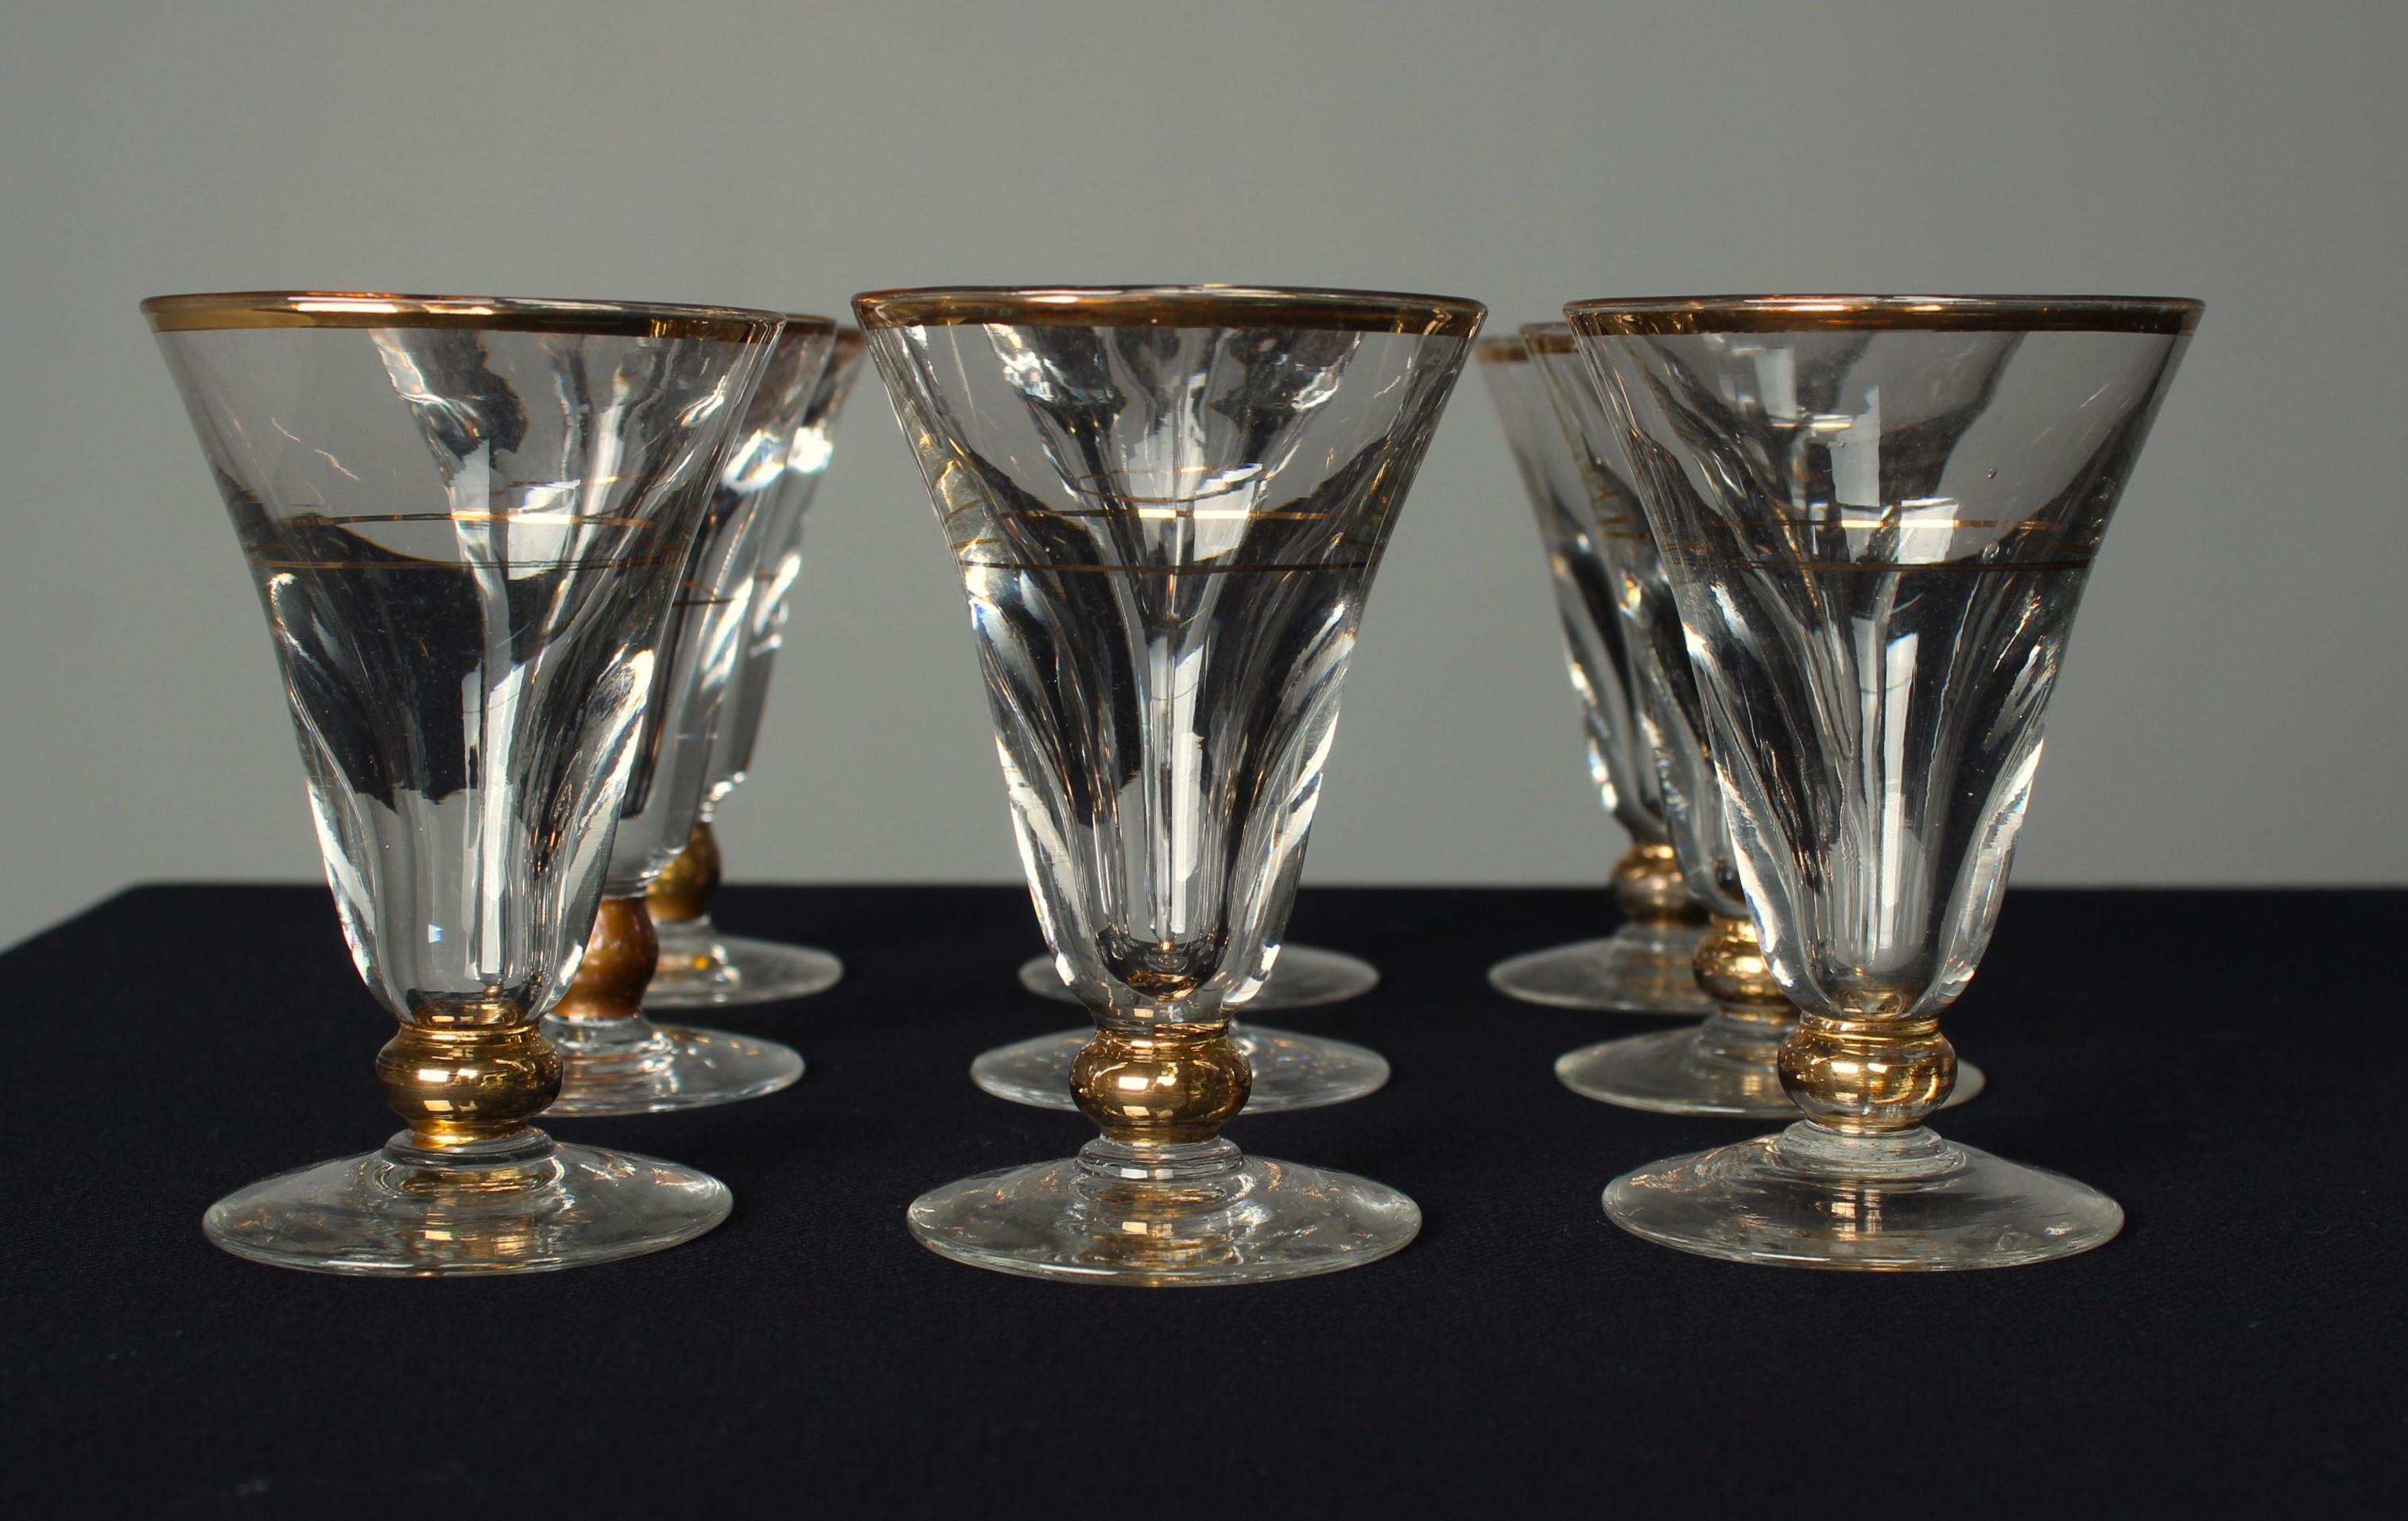 9 Art Nouveau Aperitif Glasses, 1900s, France, Crystal Glass With Gold Decor For Sale 1